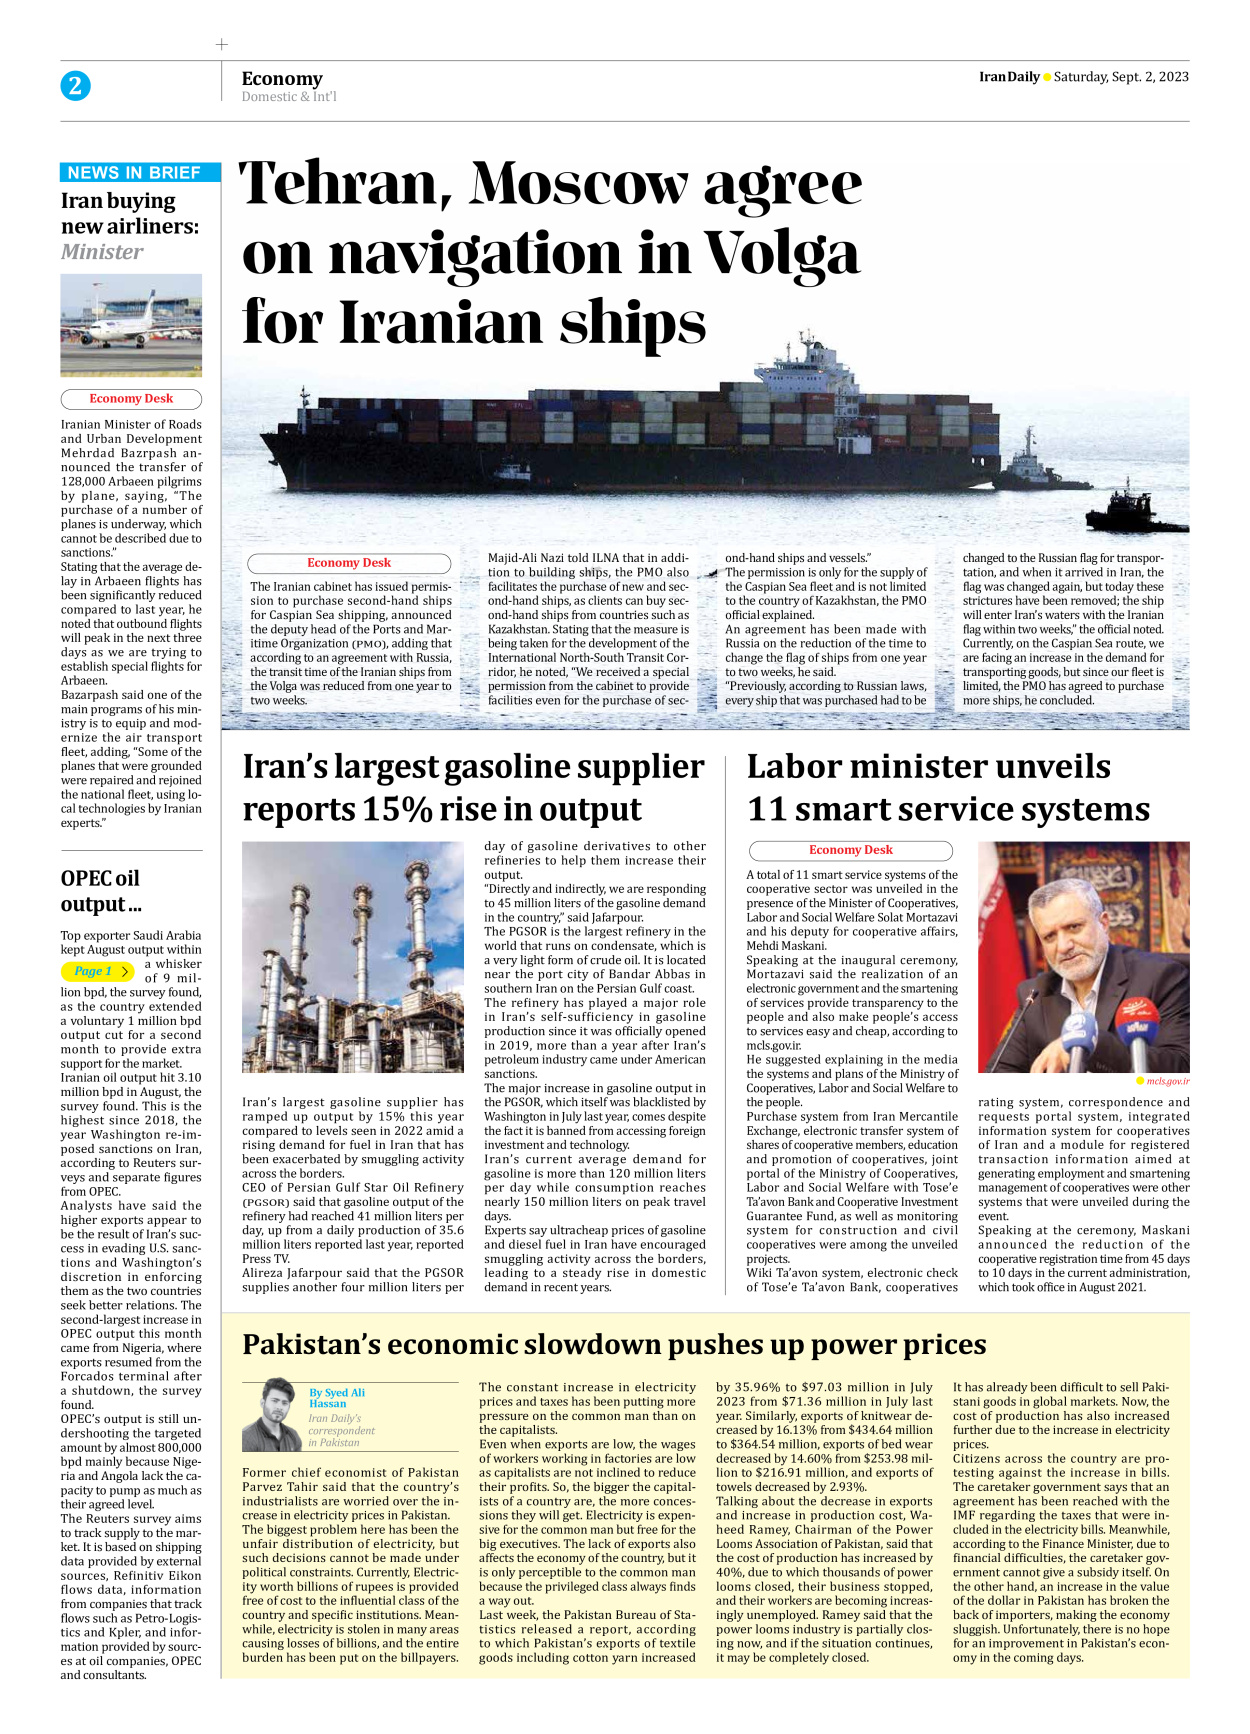 Iran Daily - Number Seven Thousand Three Hundred and Seventy Eight - 02 September 2023 - Page 2